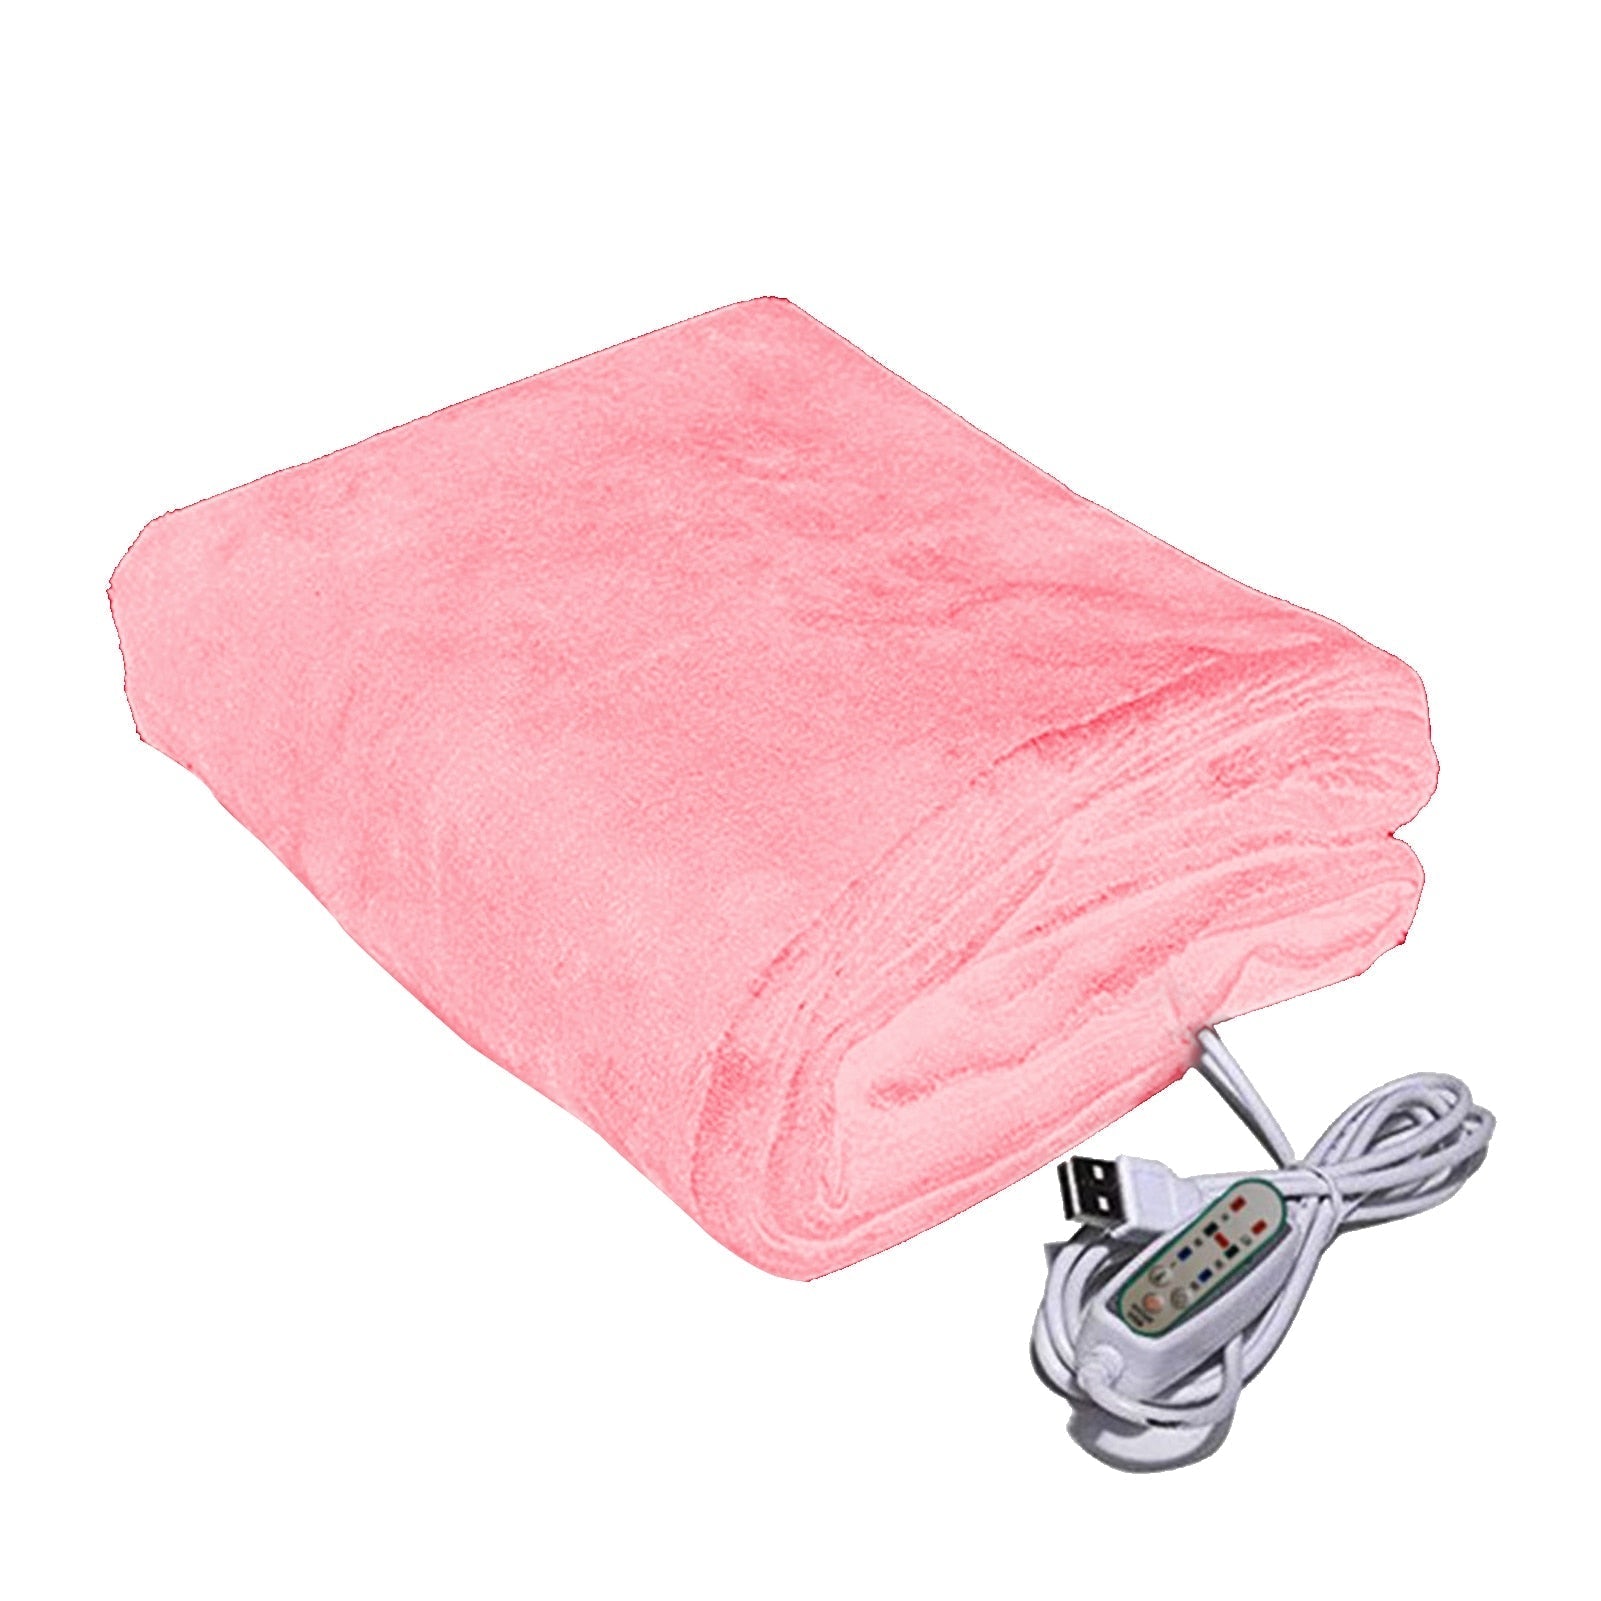 3 Levels Machine Washable Electric Blanket Thermostat Soft Plush Camping Home Office USB Heating Portable Travel For Sofa Bed